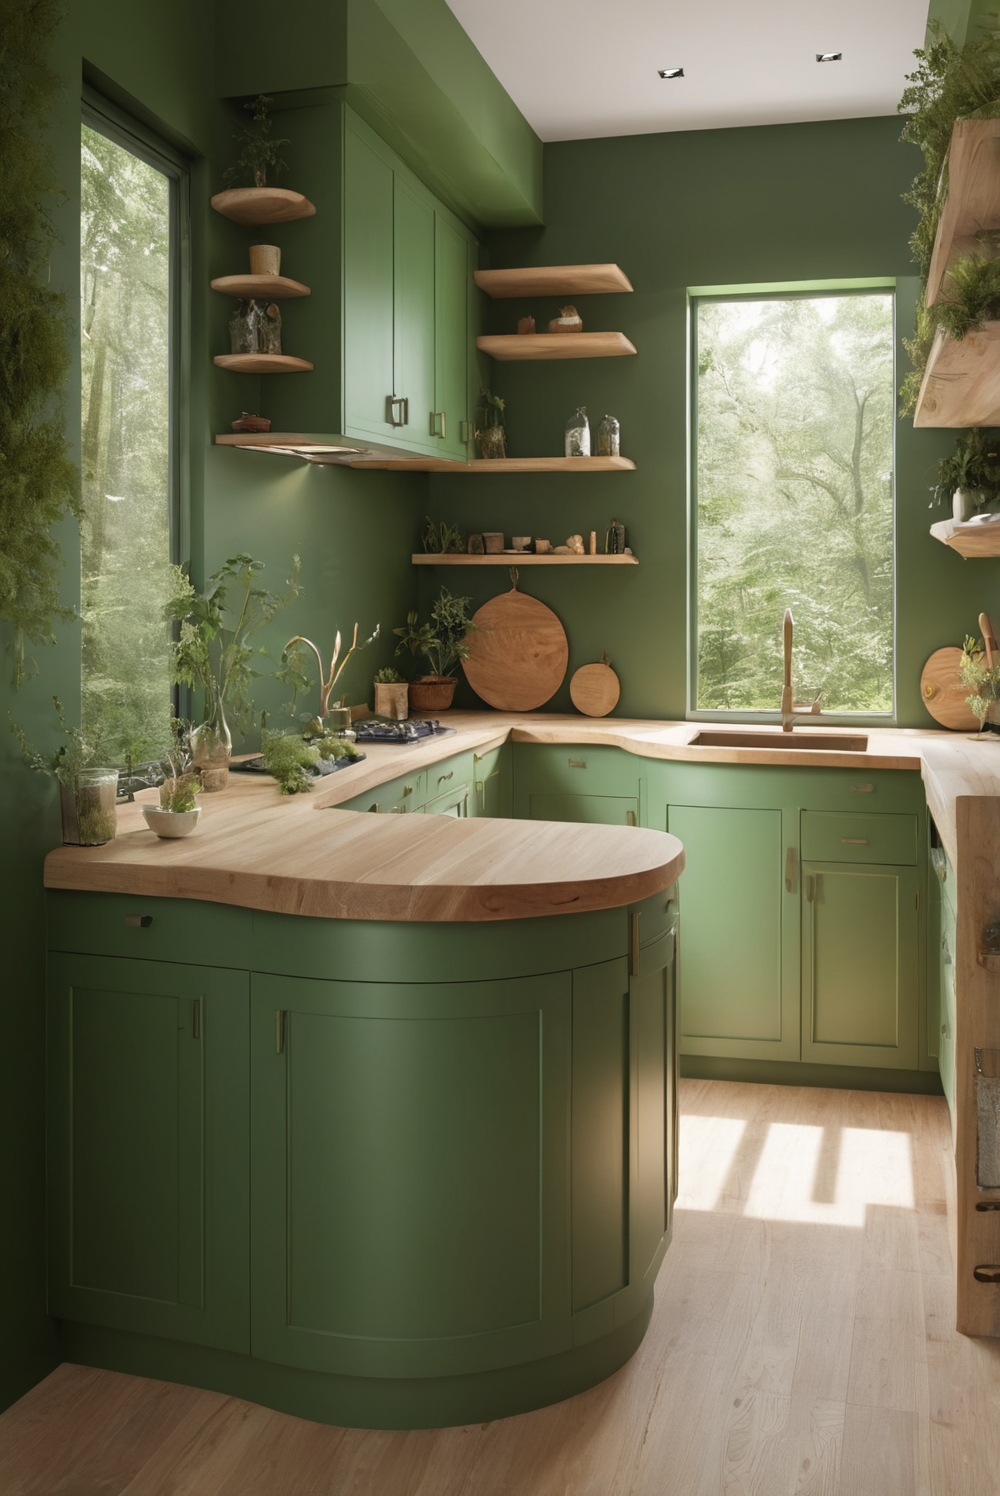 Green cabinets, wall paint, interior design, home decor, kitchen designs, living room interior, paint color match